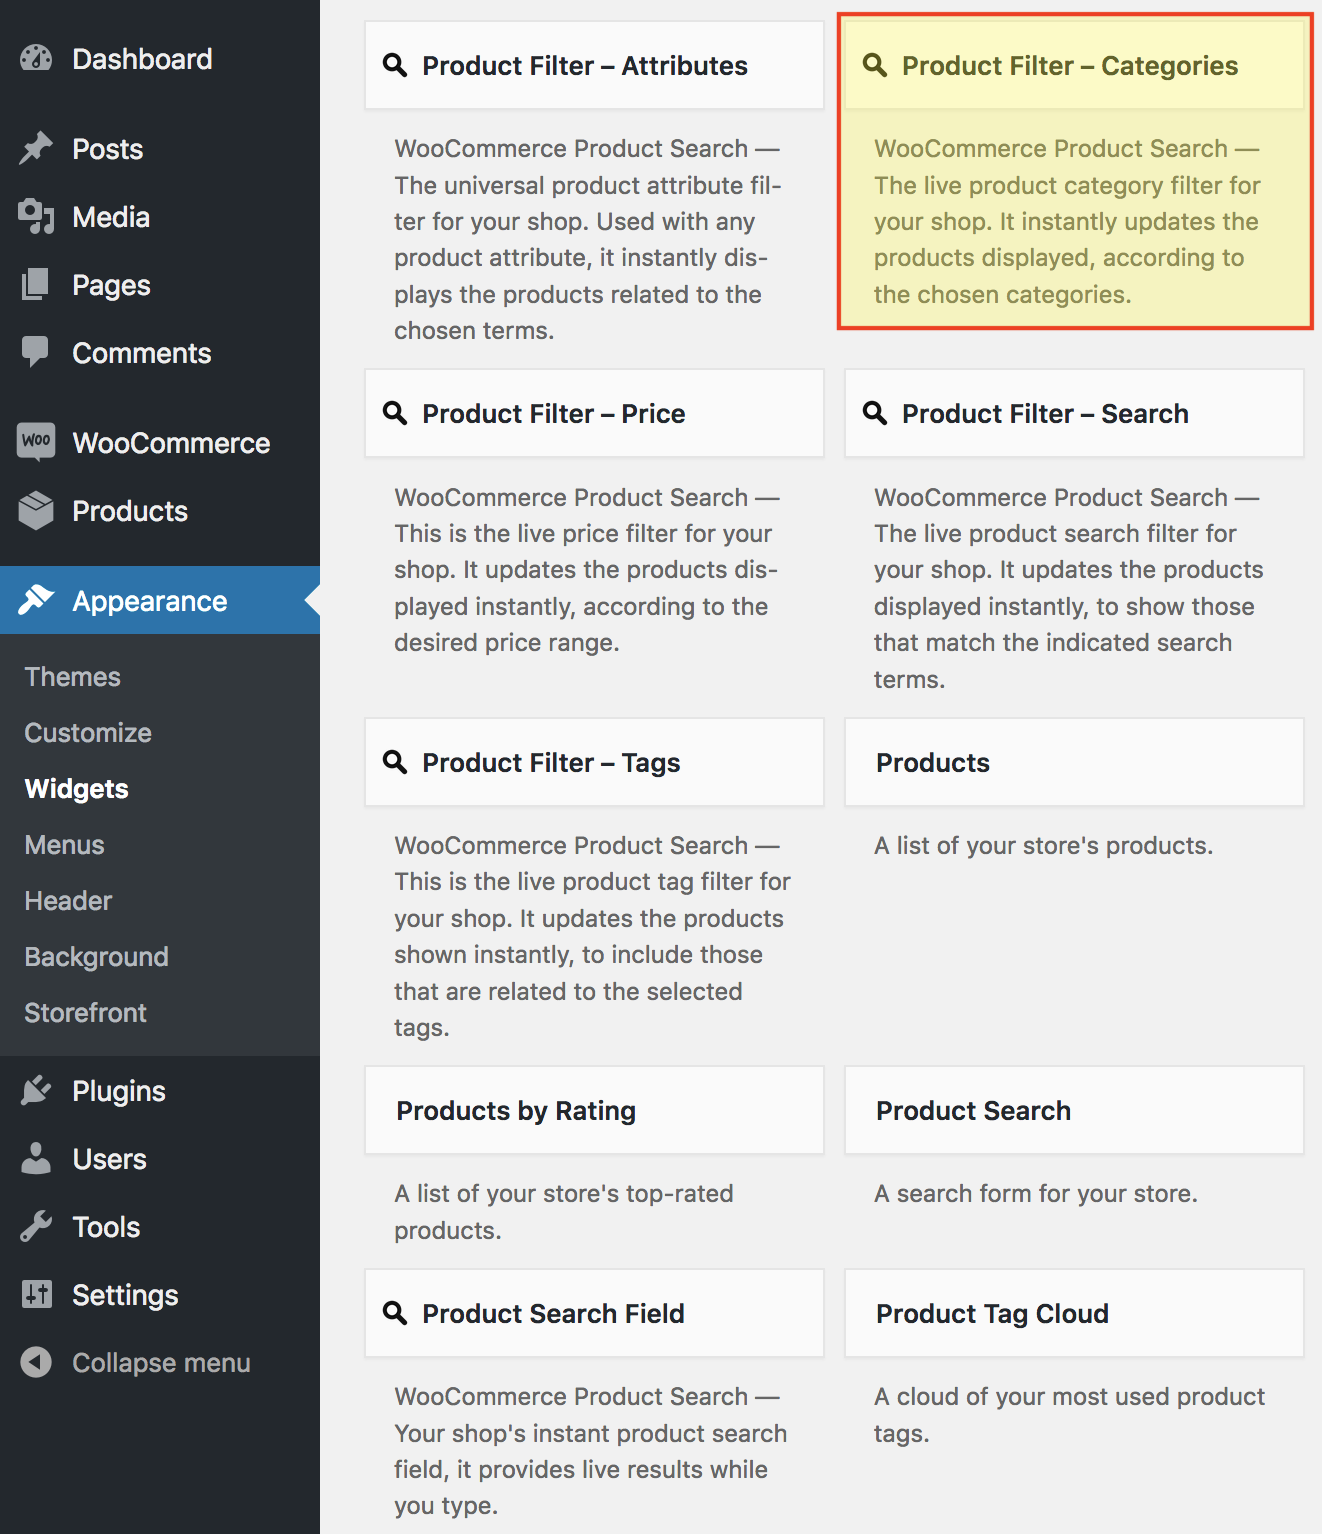 Product Filter Categories -